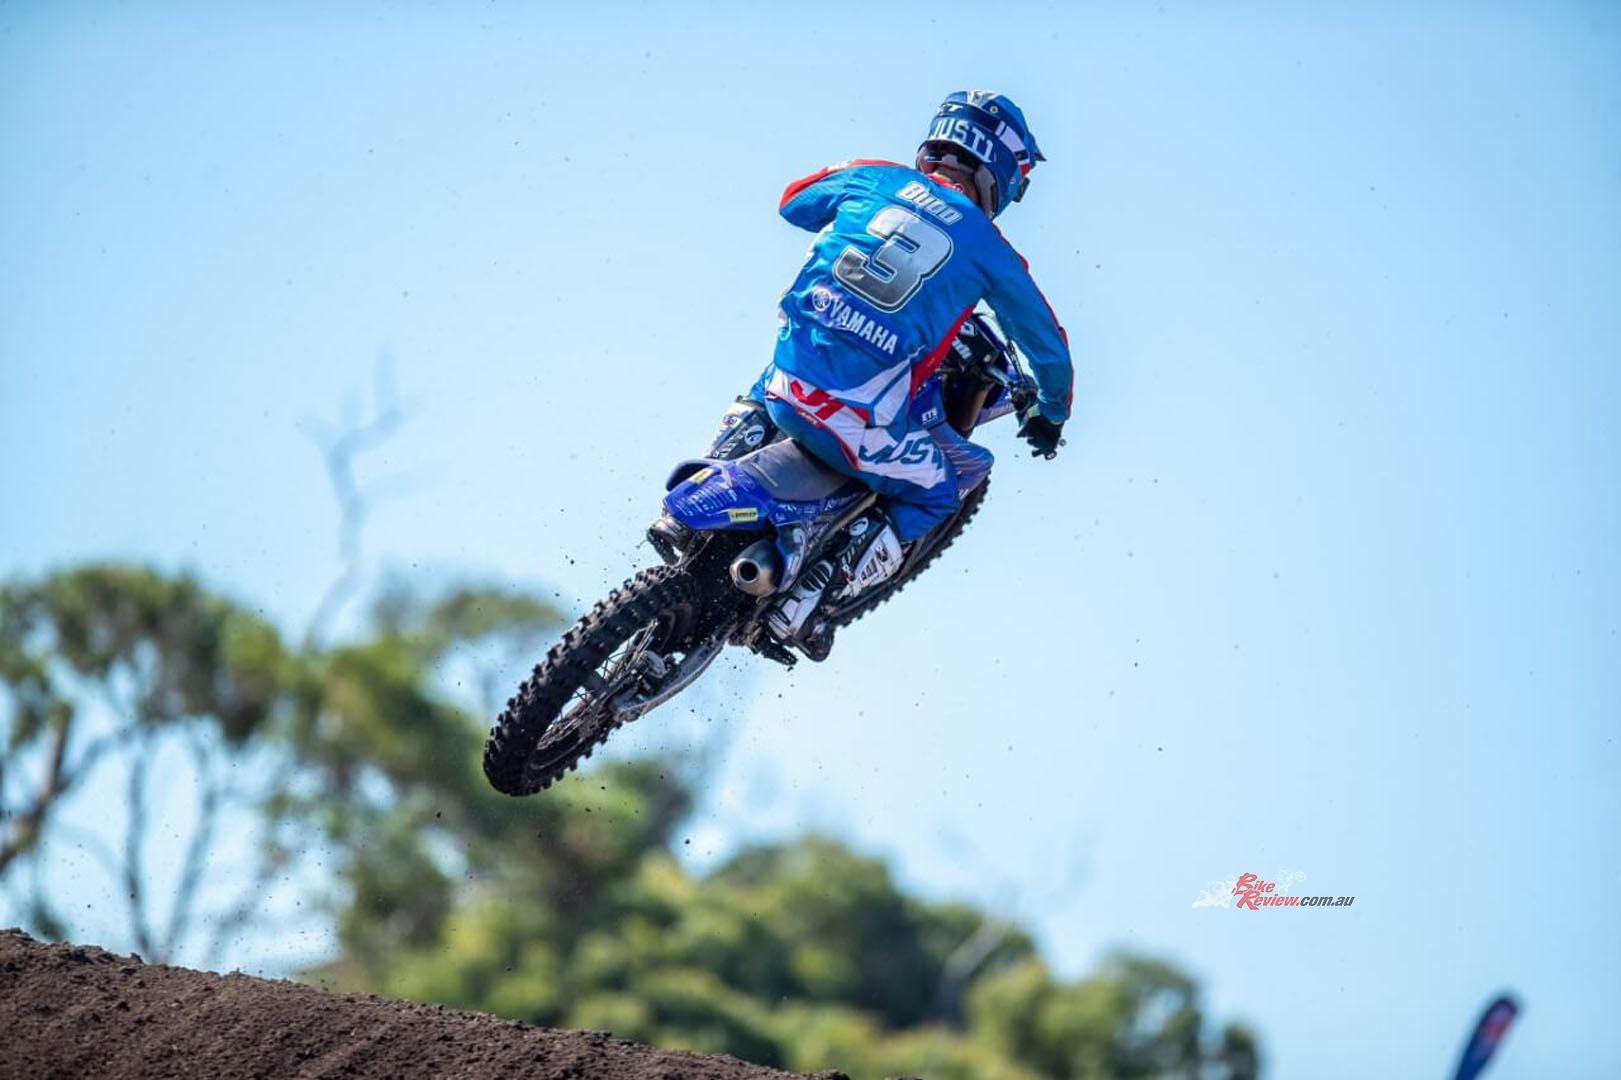 Rhys Budd didn’t have the day he was wanting but the hardworking rider is determined to redeem himself at the next round in Mackay. Budd finished ninth for the round with 13-6 moto results.